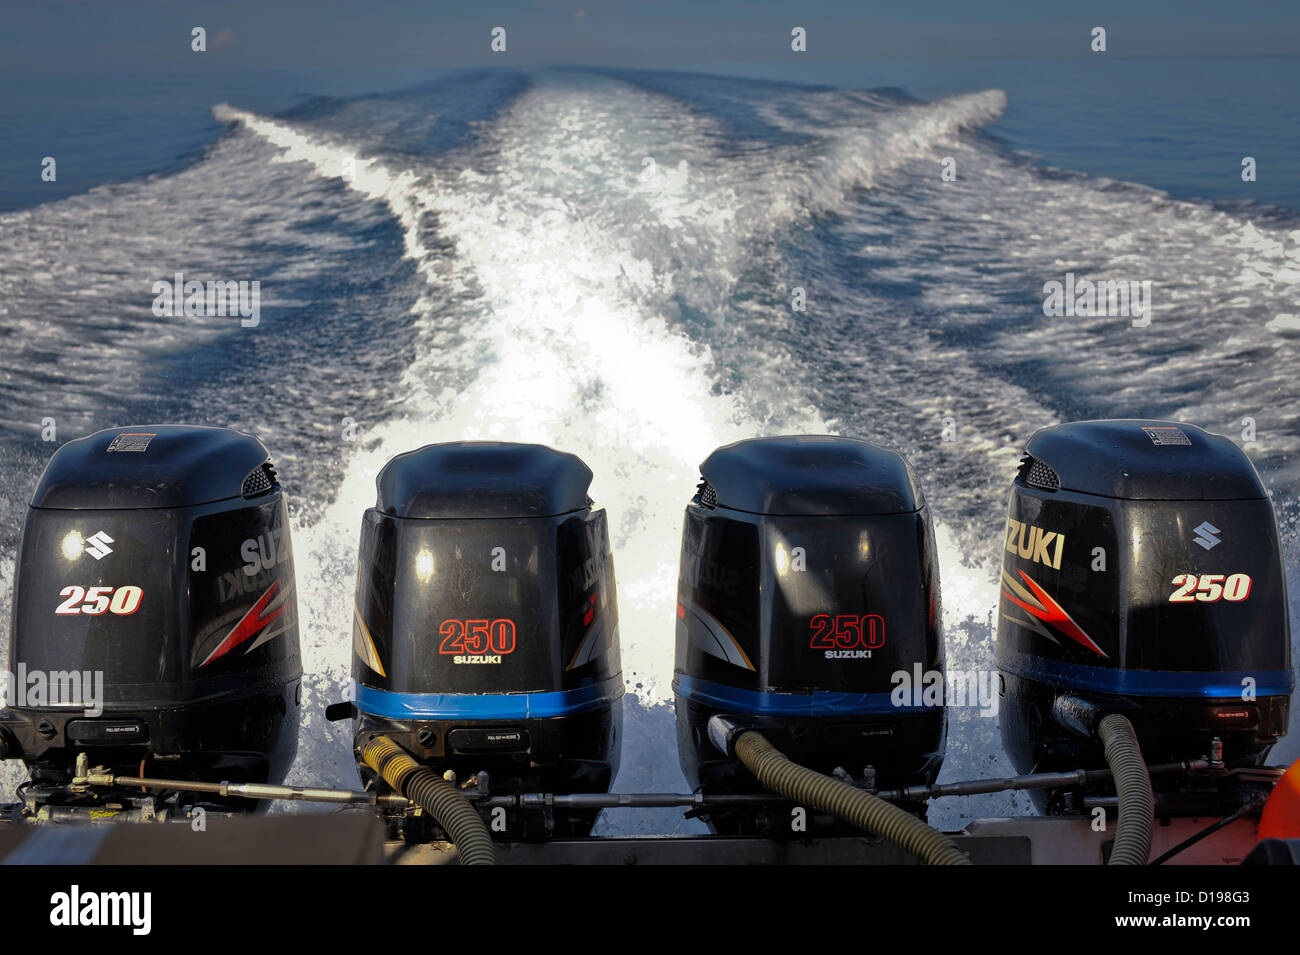 Four 250hp outboards power an inter island ferry, Indonesia Stock Photo